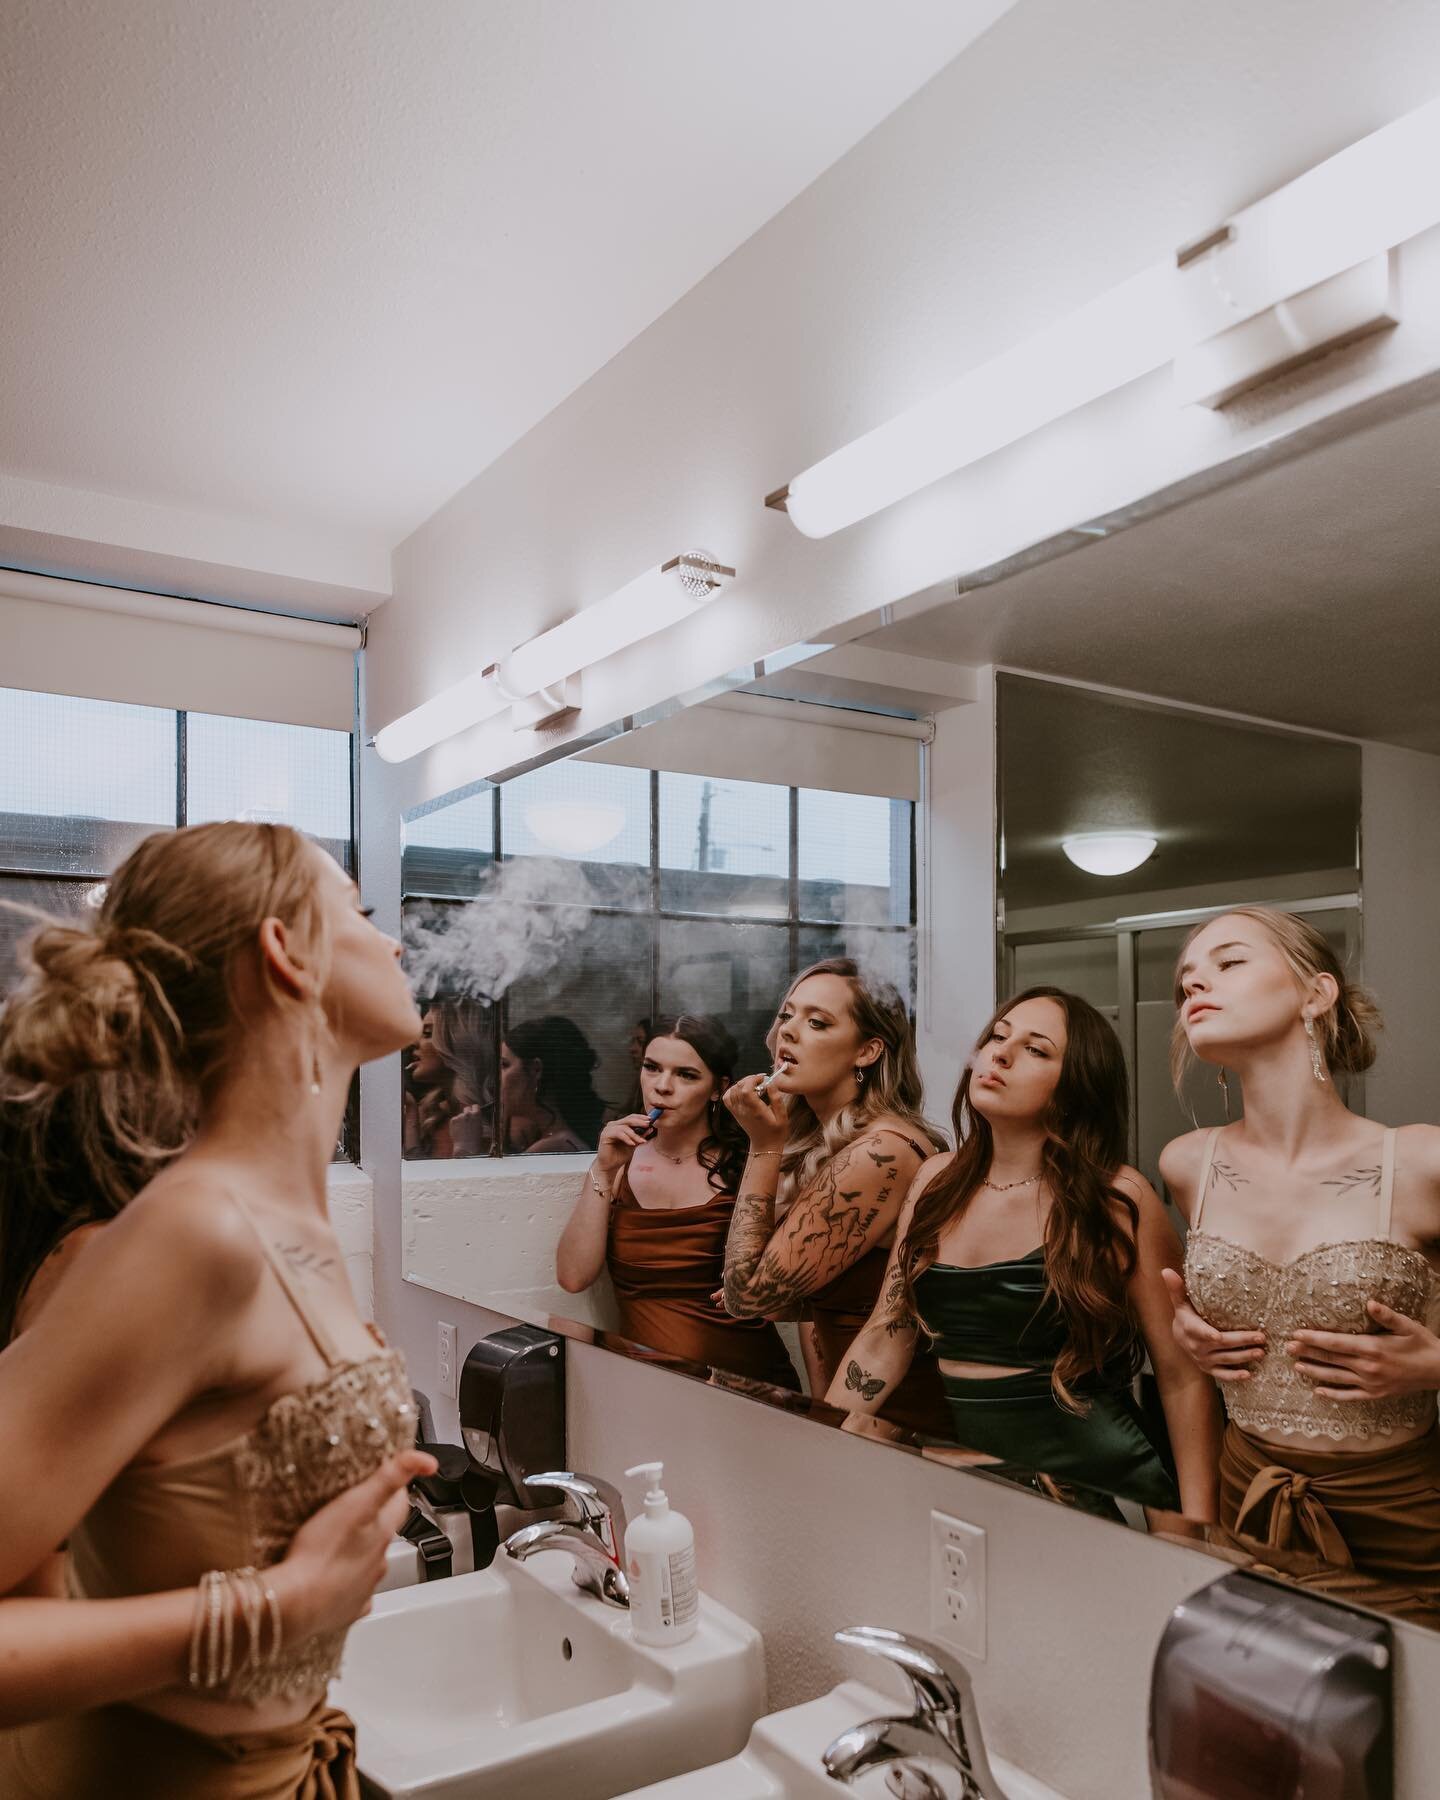 As soon as I walked into this bathroom pre-ceremony I knew it HAD to be used for a Euphoria inspired photo. Next time I walked in, I ran into these beauties, and they KILLED the vision. It deserves a permanent spot here between all the sweet romantic